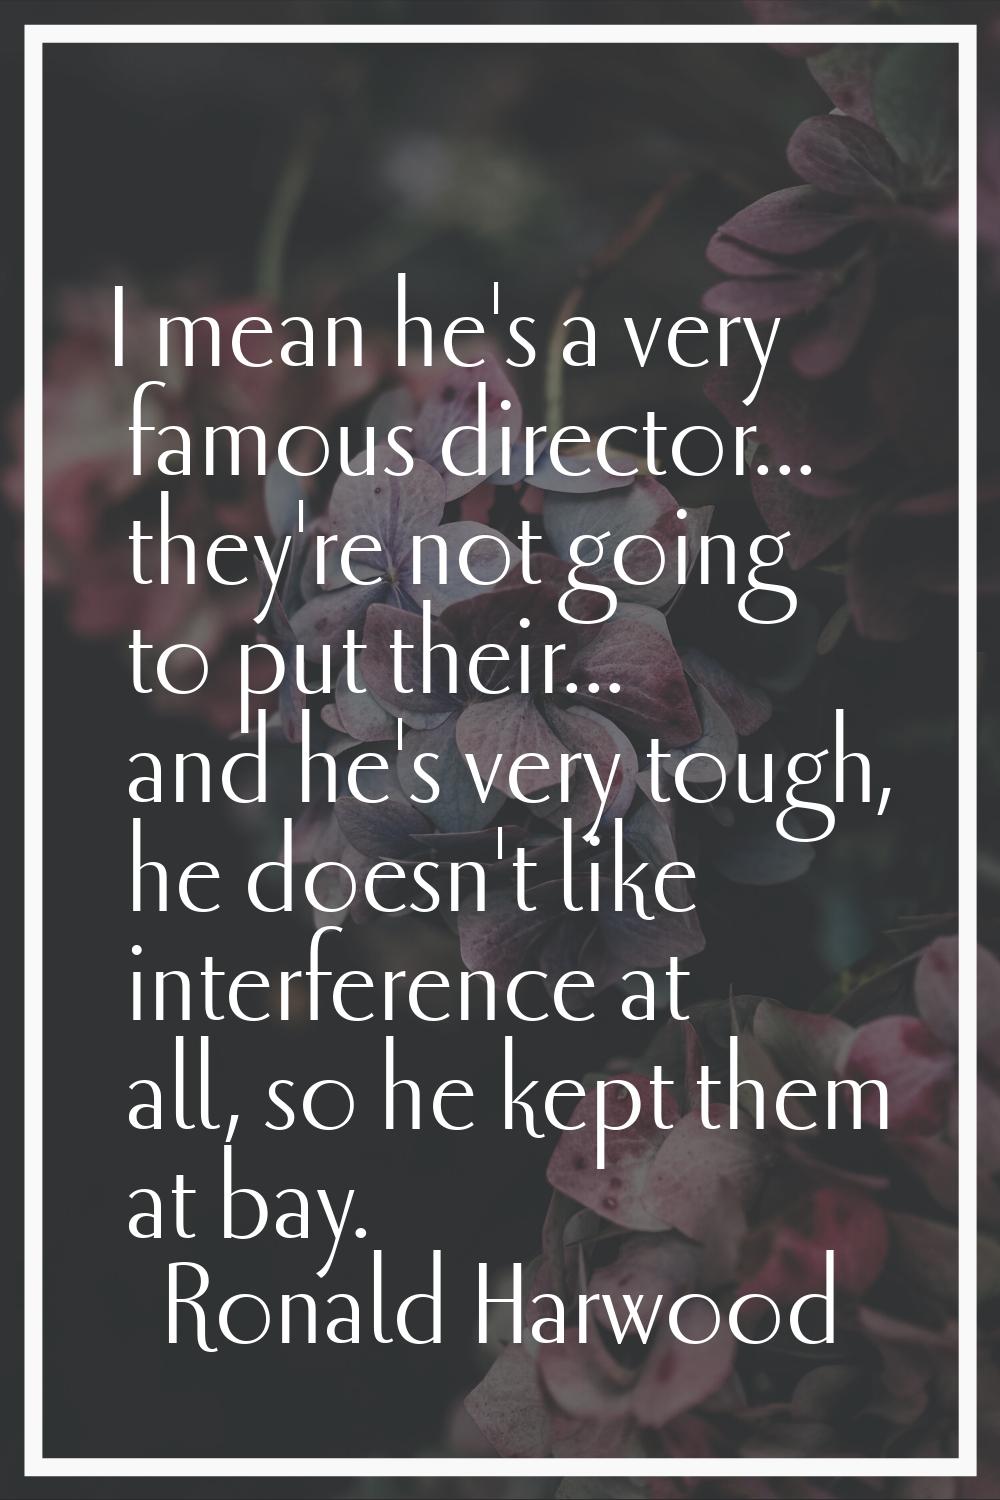 I mean he's a very famous director... they're not going to put their... and he's very tough, he doe